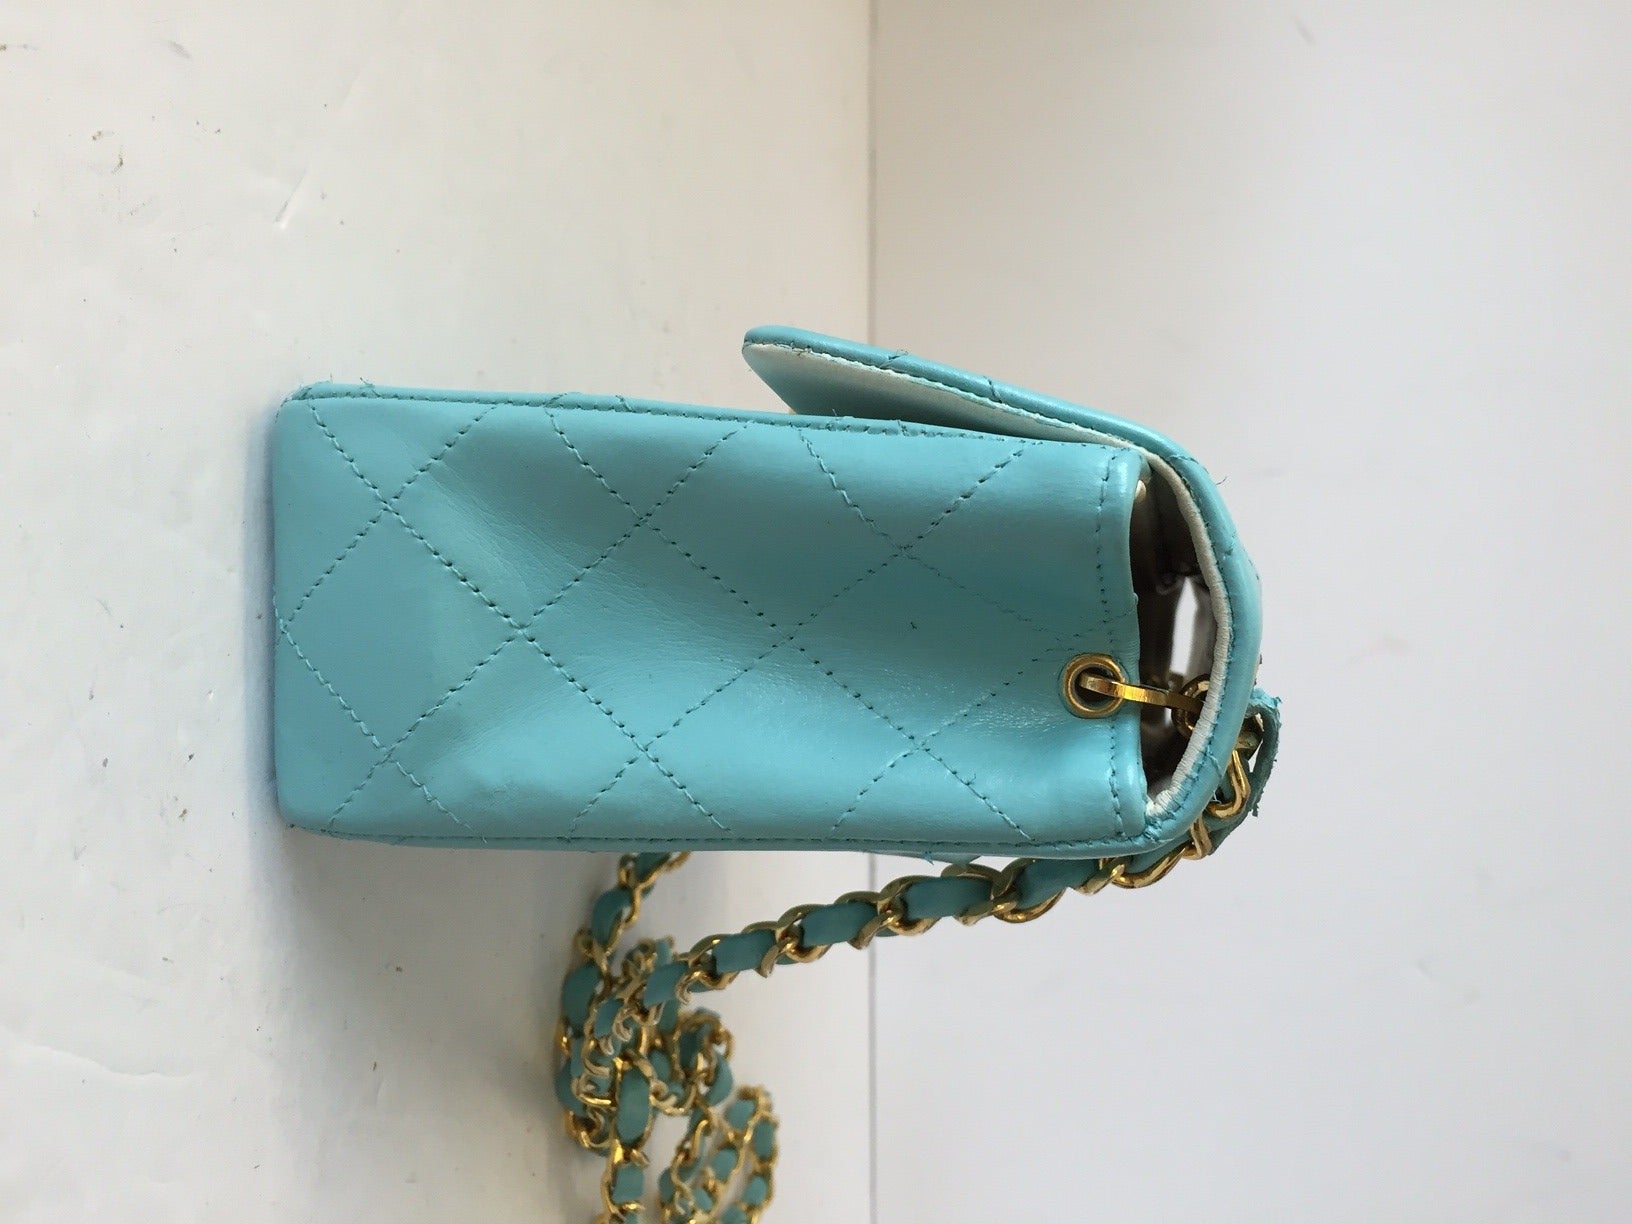 Brand: Chanel
Manufactured: France 
Color: Tiffany Blue 
Size: Small
Year: 1987

Bag Length: 6.5